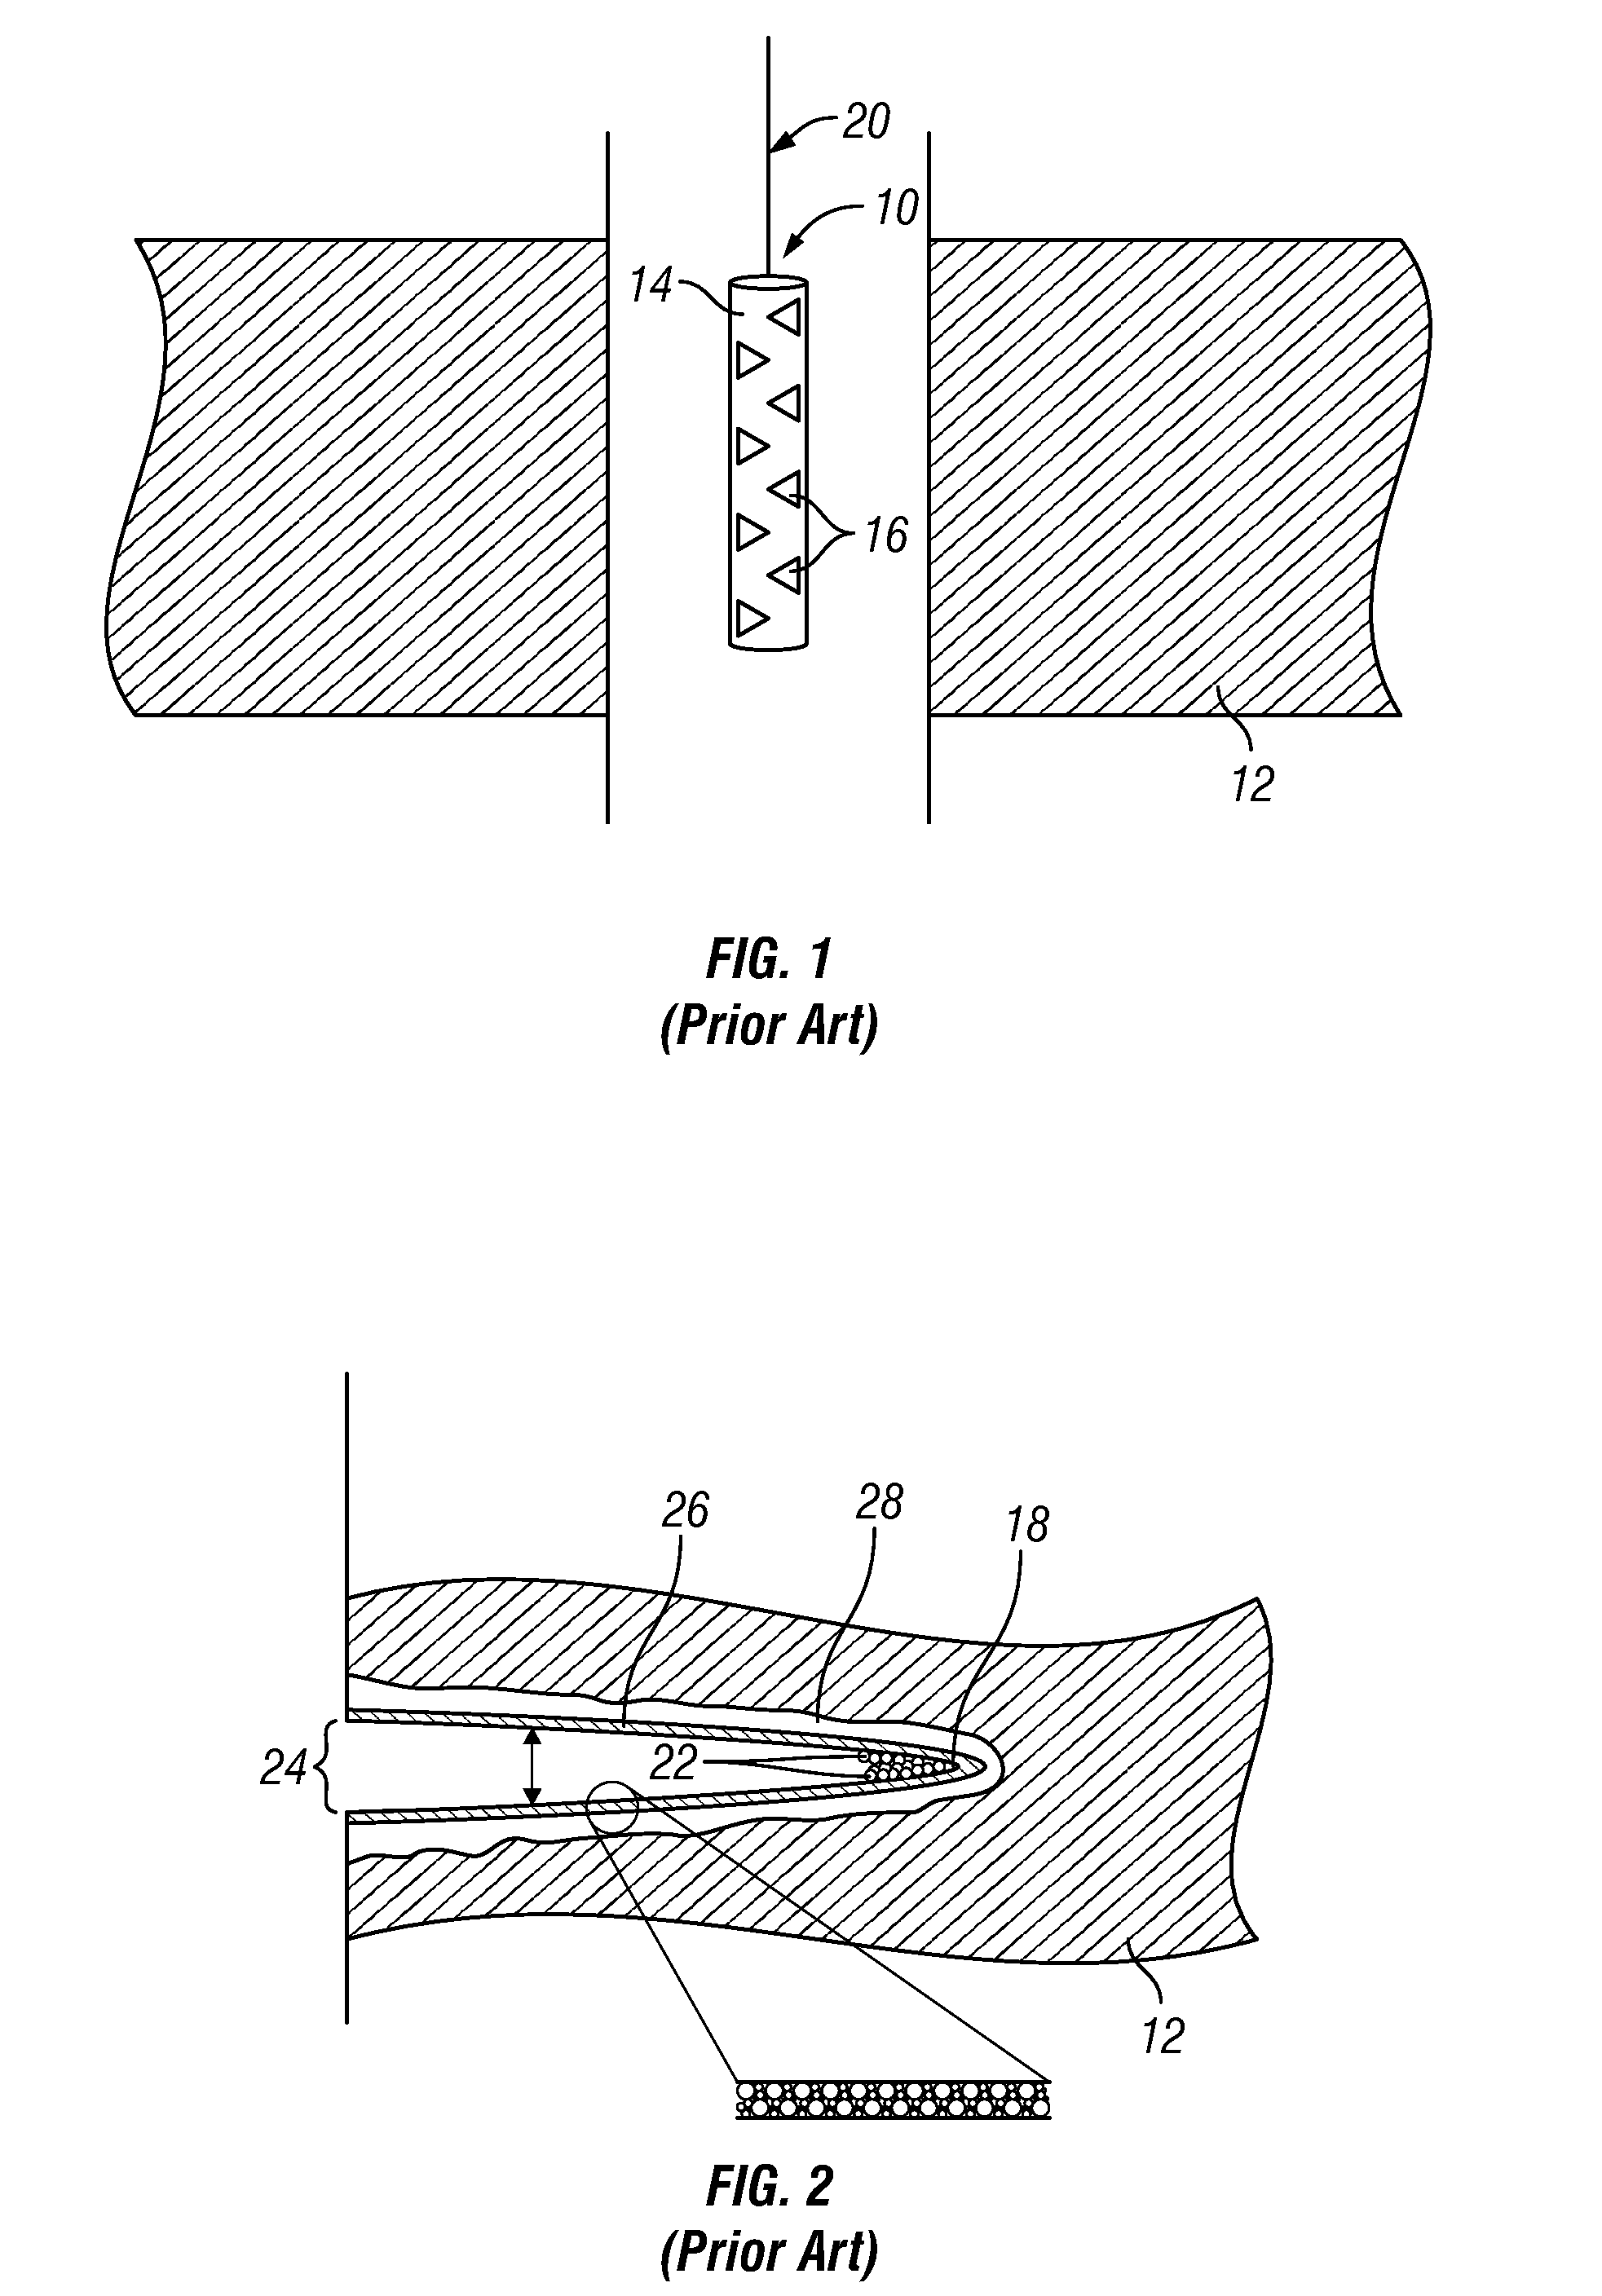 Method for the Enhancement of Dynamic Underbalanced Systems and Optimization of Gun Weight